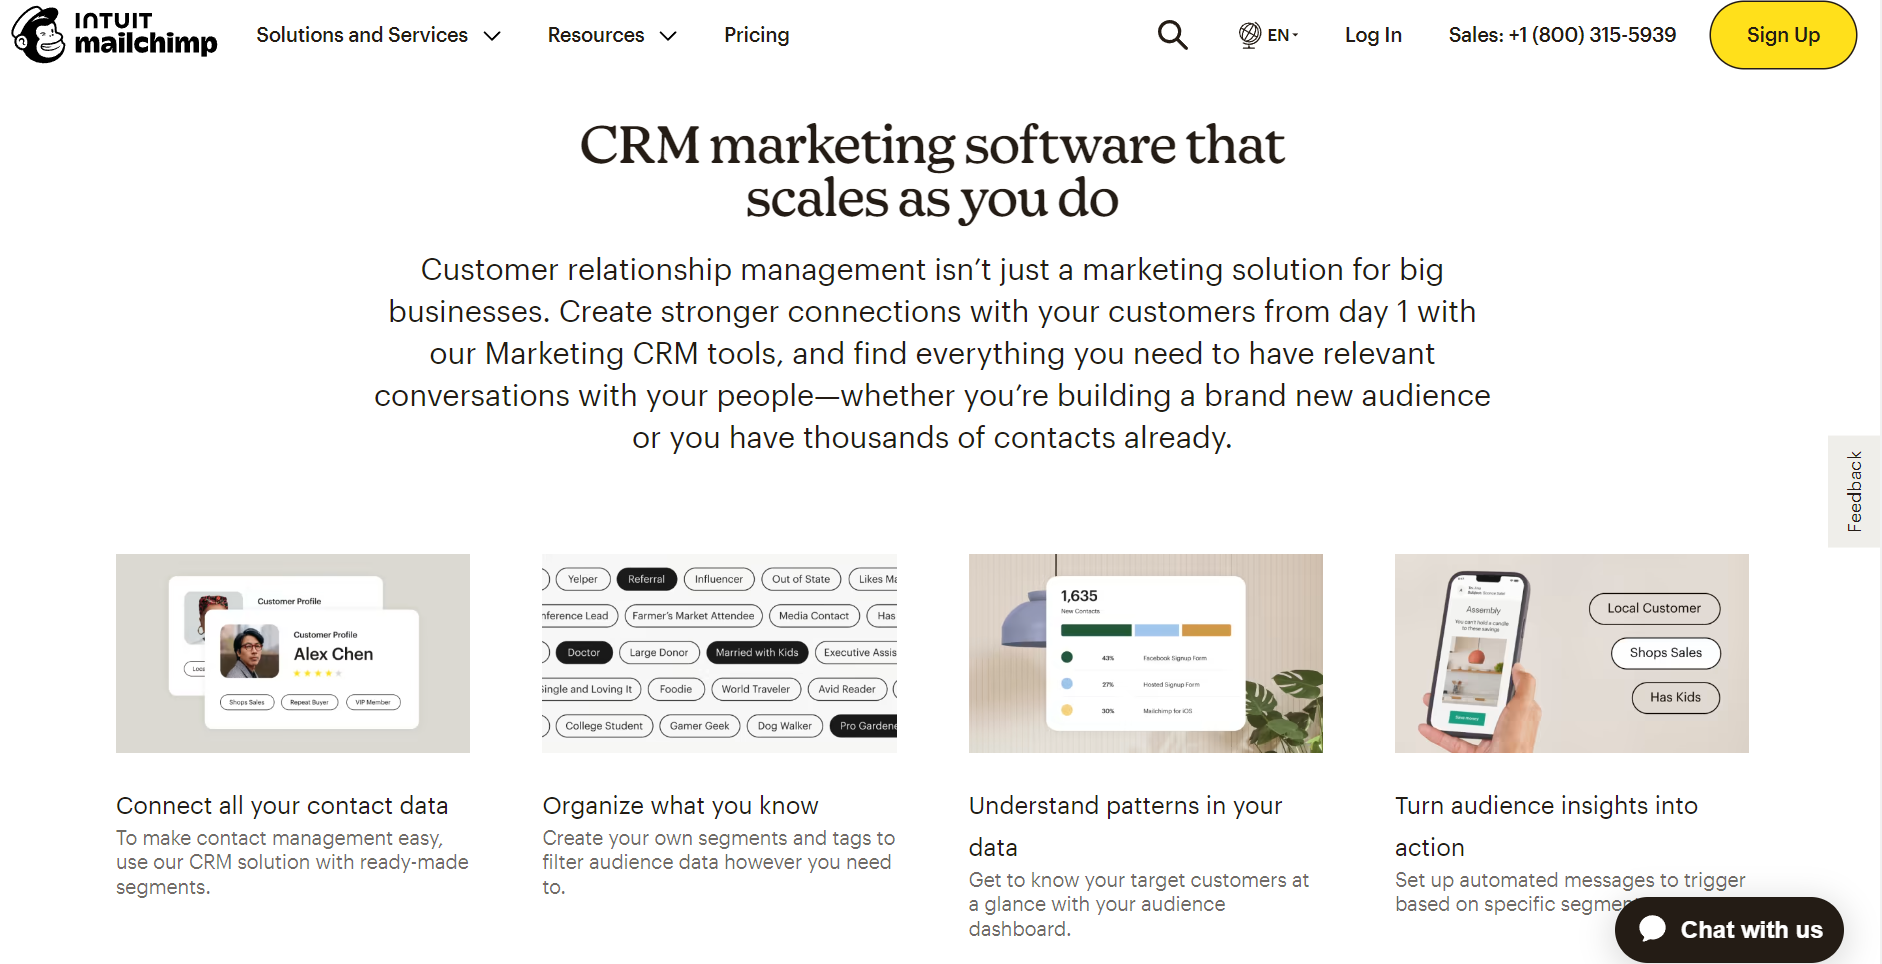 Pros and cons of mailchimp crm